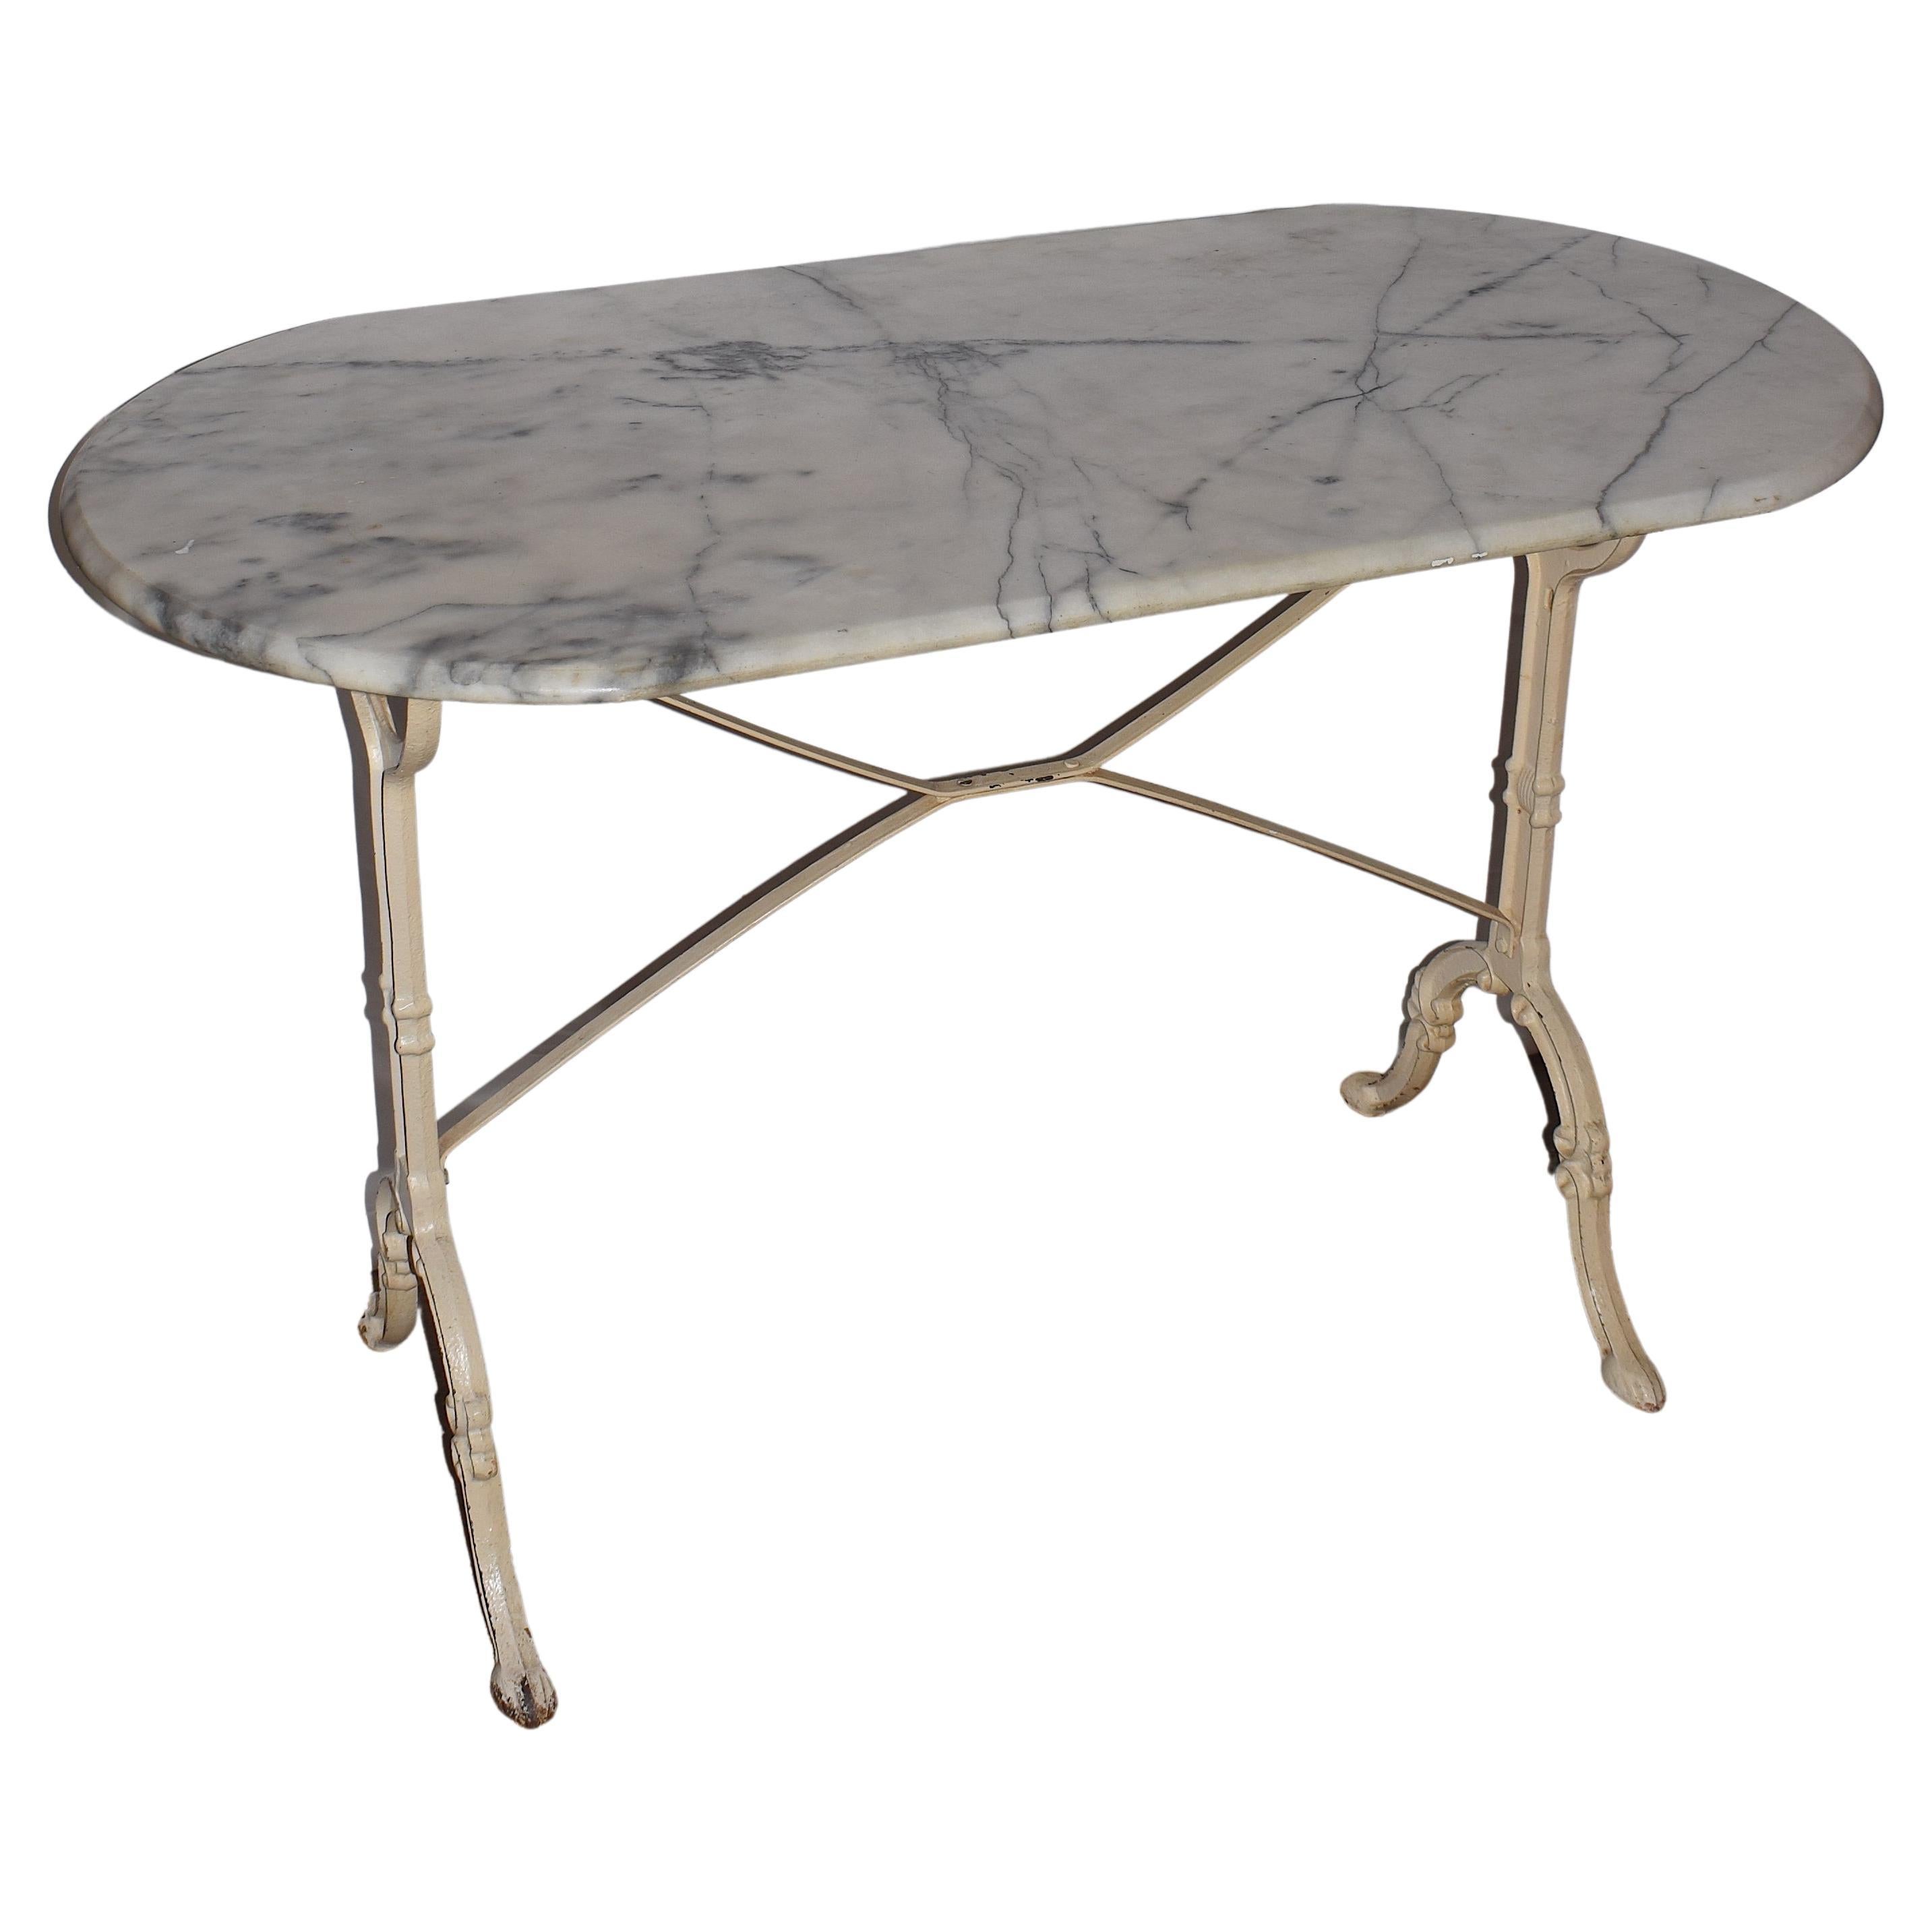 French, Vintage Bistro Table with a Oval Marble Top from the Early 20th  Century For Sale at 1stDibs